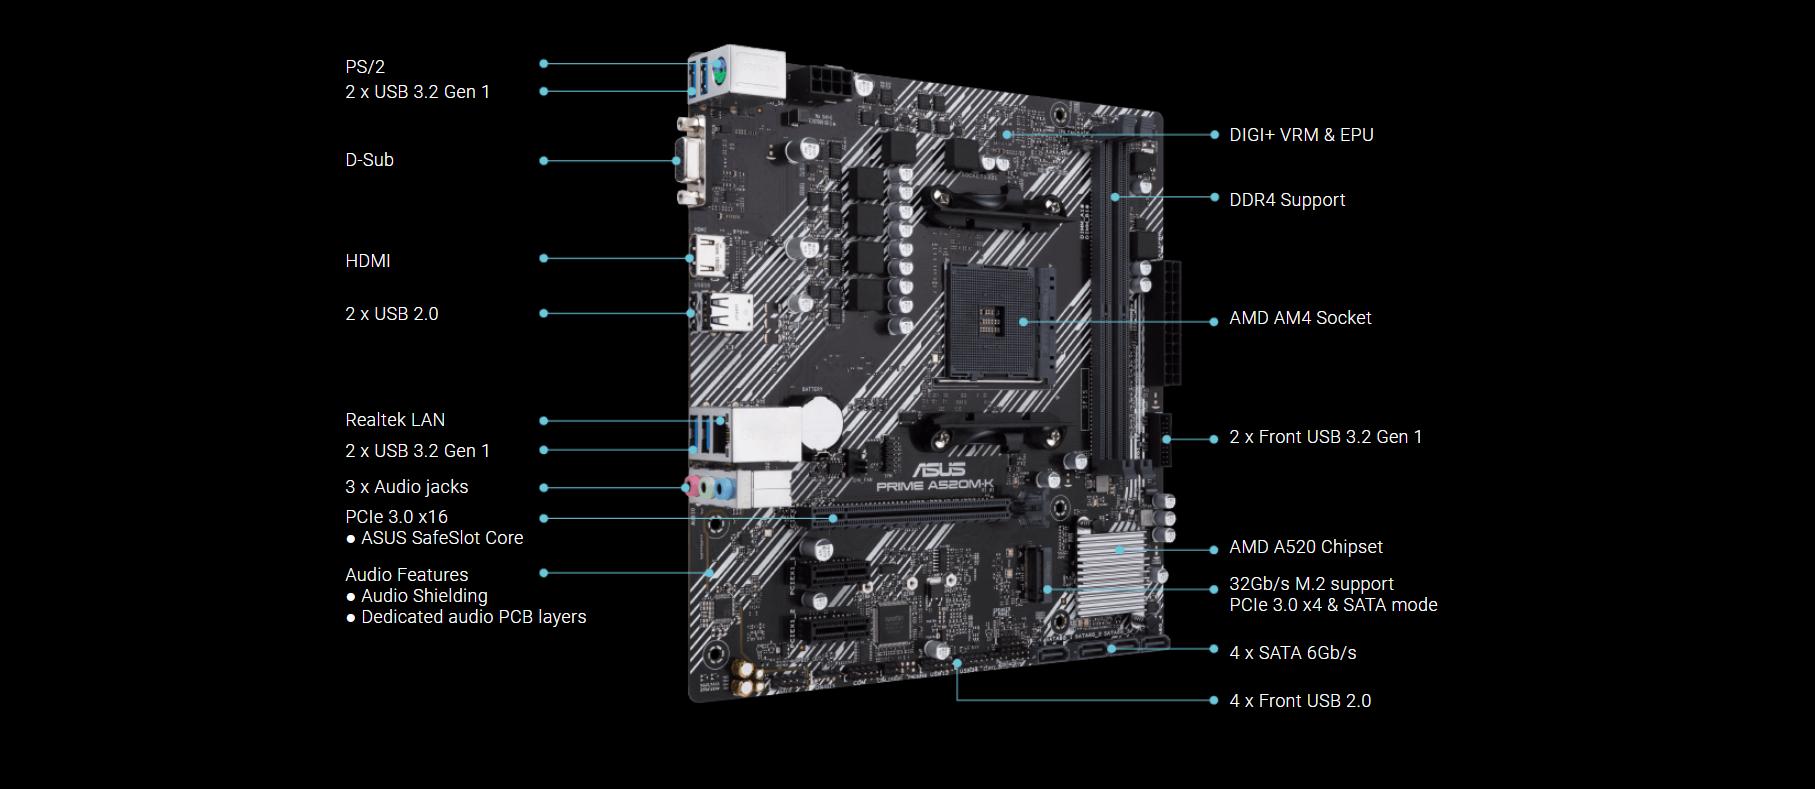 Mainboard ASUS PRIME A520M-K - songphuong.vn